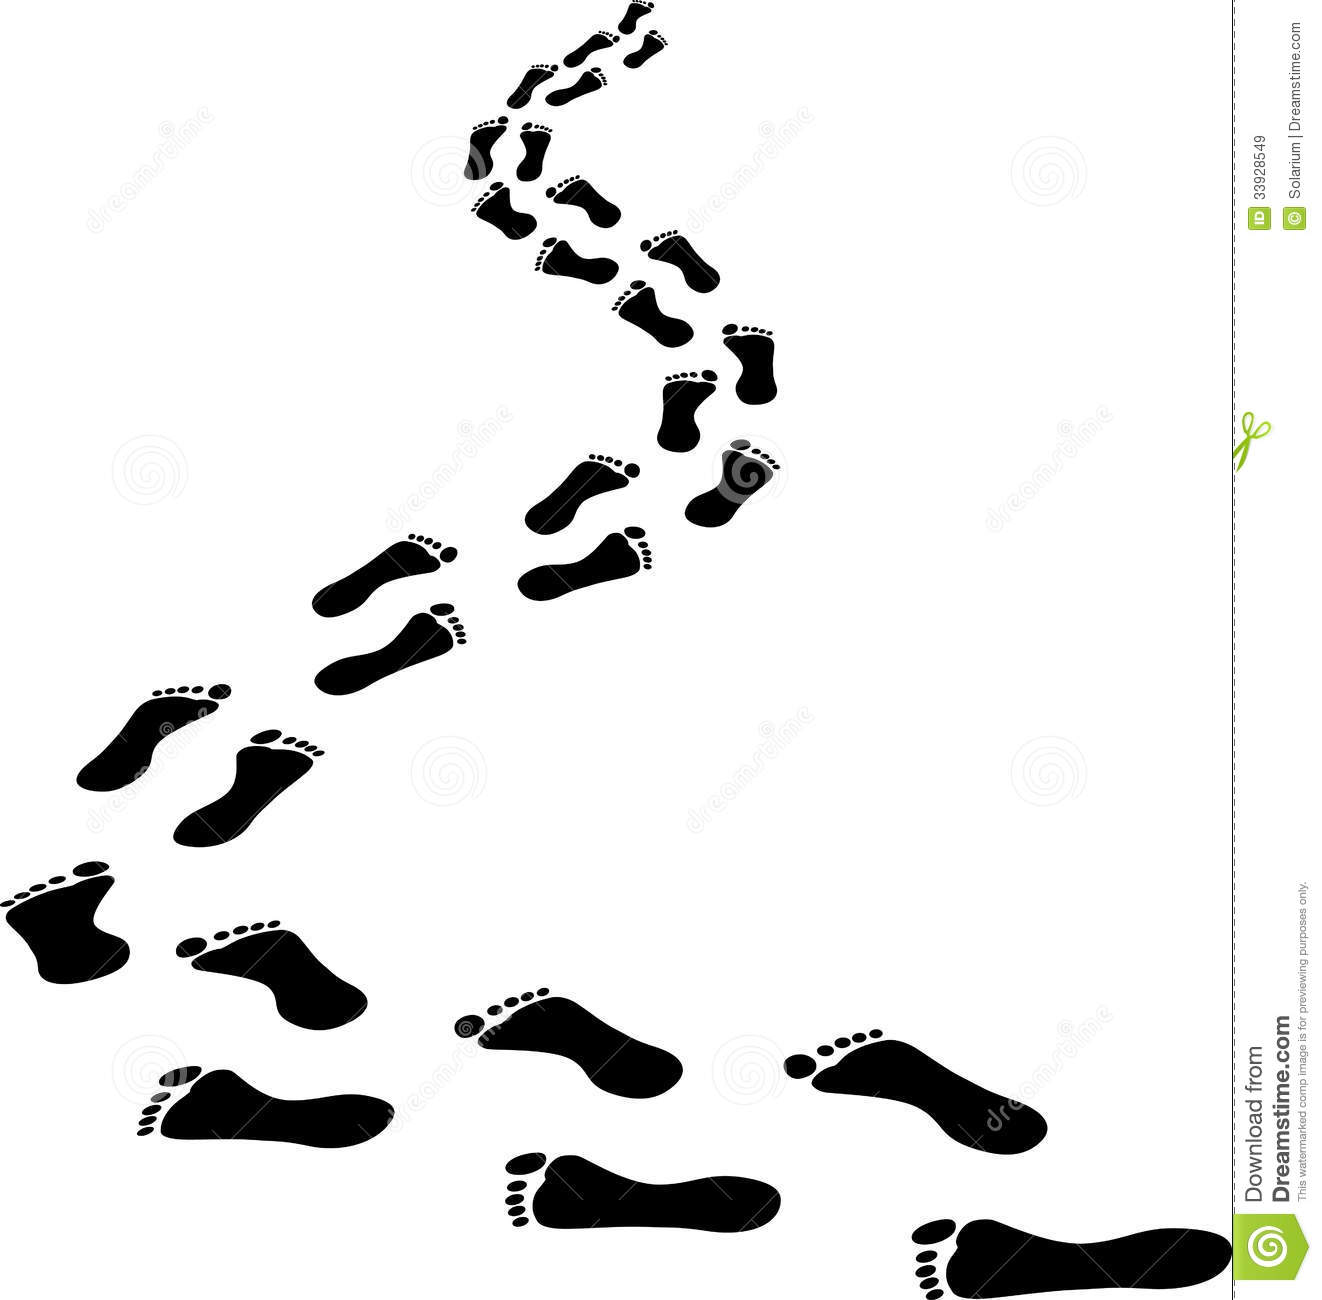 Footprints Royalty Free Stock Images   Image  33928549